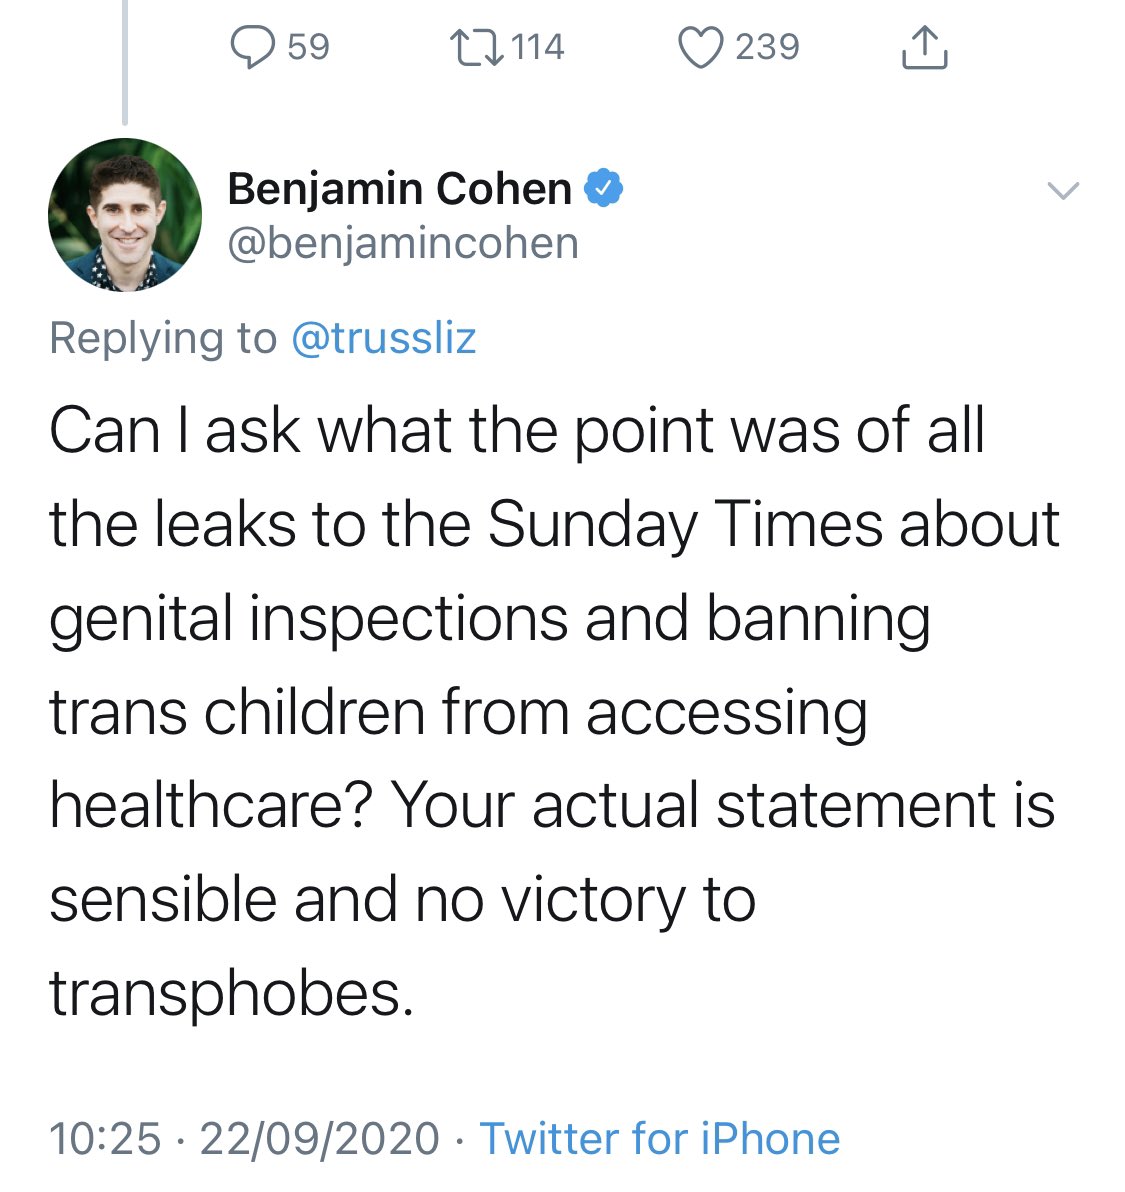  The Pink News comedy show keeps getting funnier. Here’s  @benjamincohen responding to the govt’s announcement it has rejected gender Self-ID, which he championed for 5 years. He starts with a trademark bizarre accusation, this time about genital inspections. Click here to see